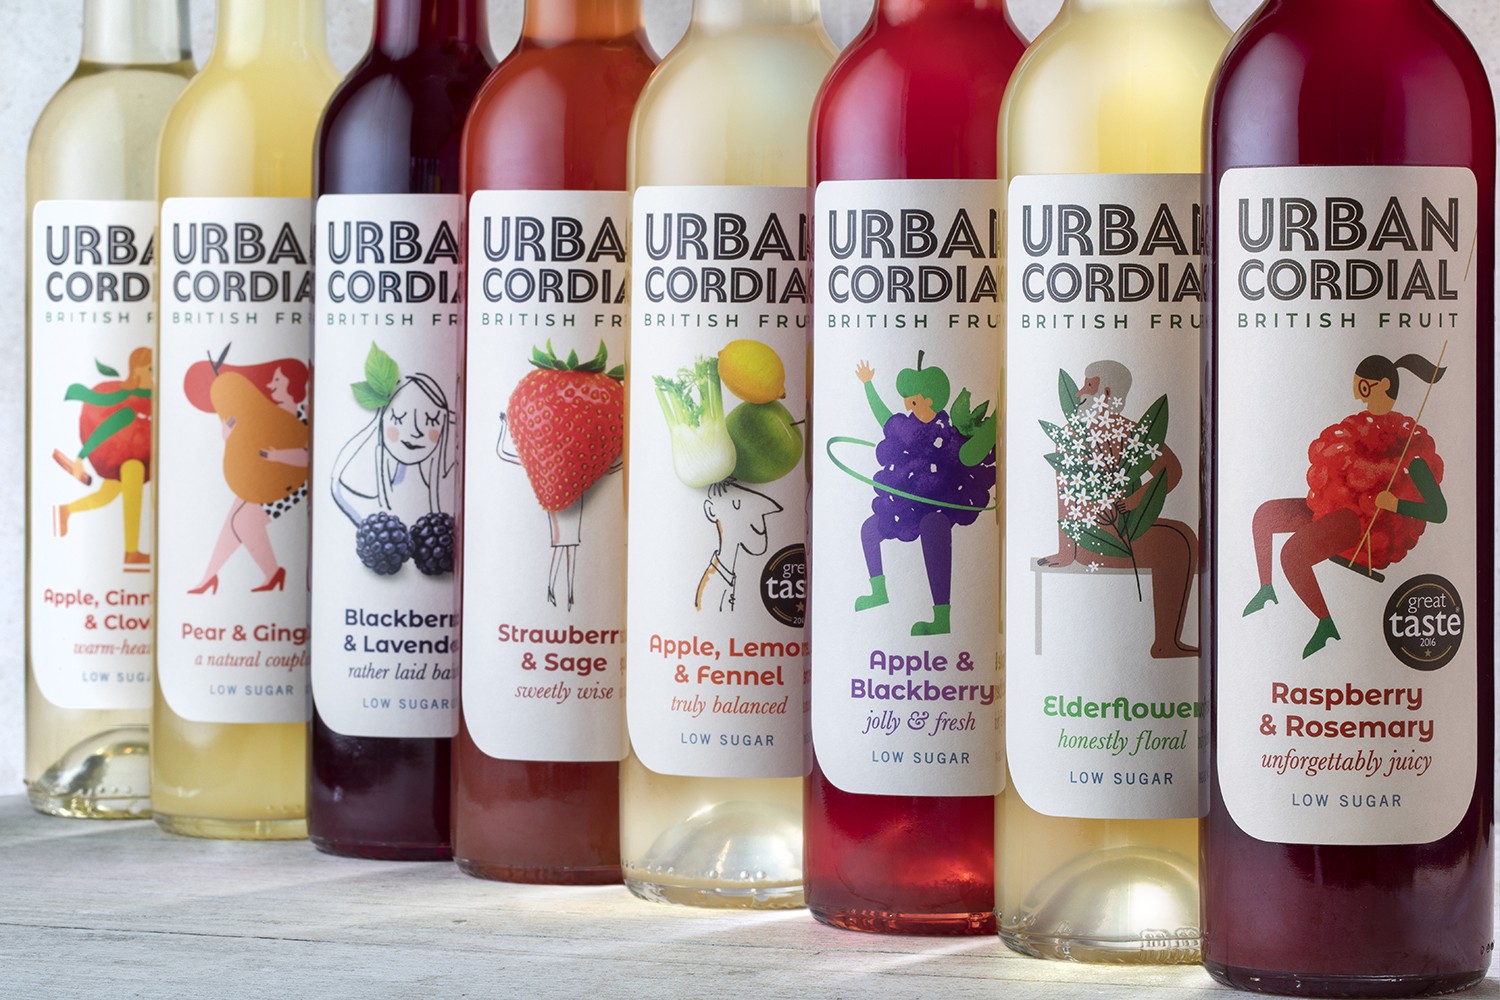 Jackdaw Design Delivers a Brand Identity With a Unique Fruity Twist for Urban Cordial